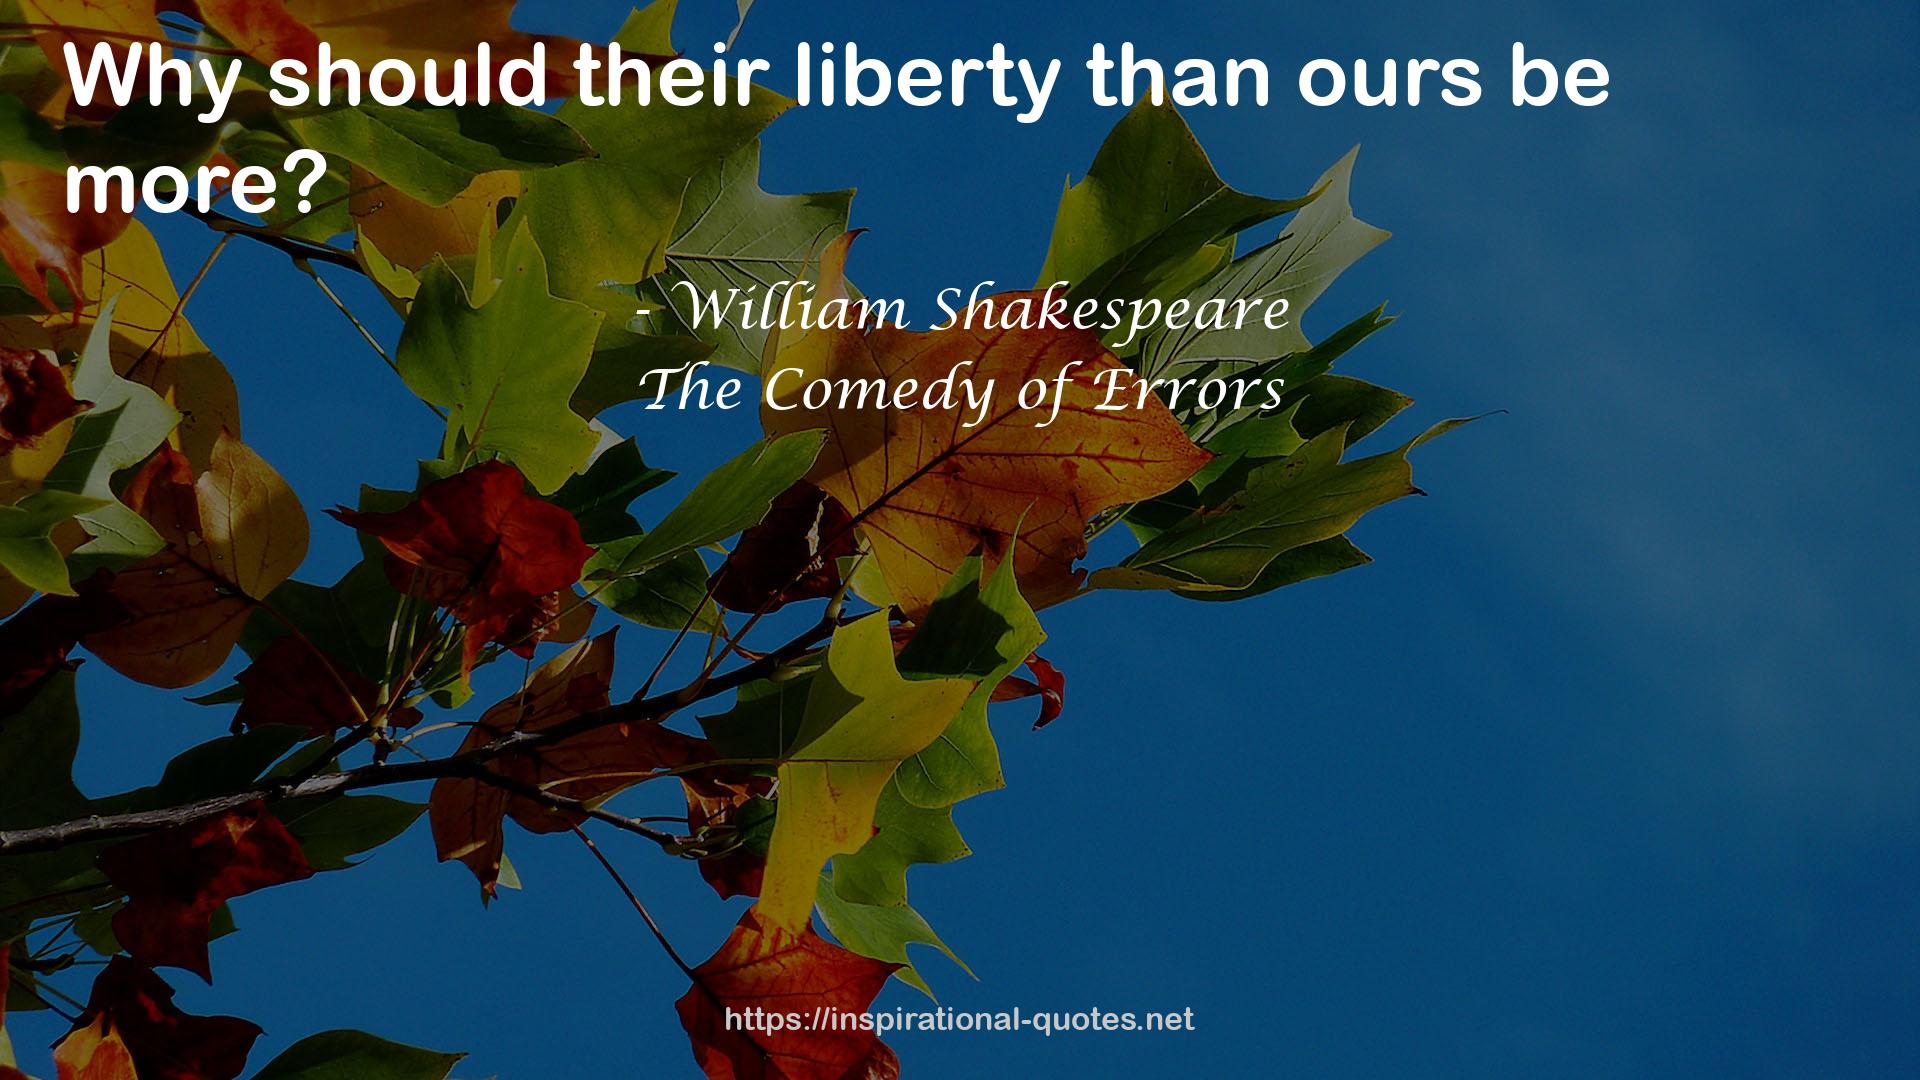 The Comedy of Errors QUOTES